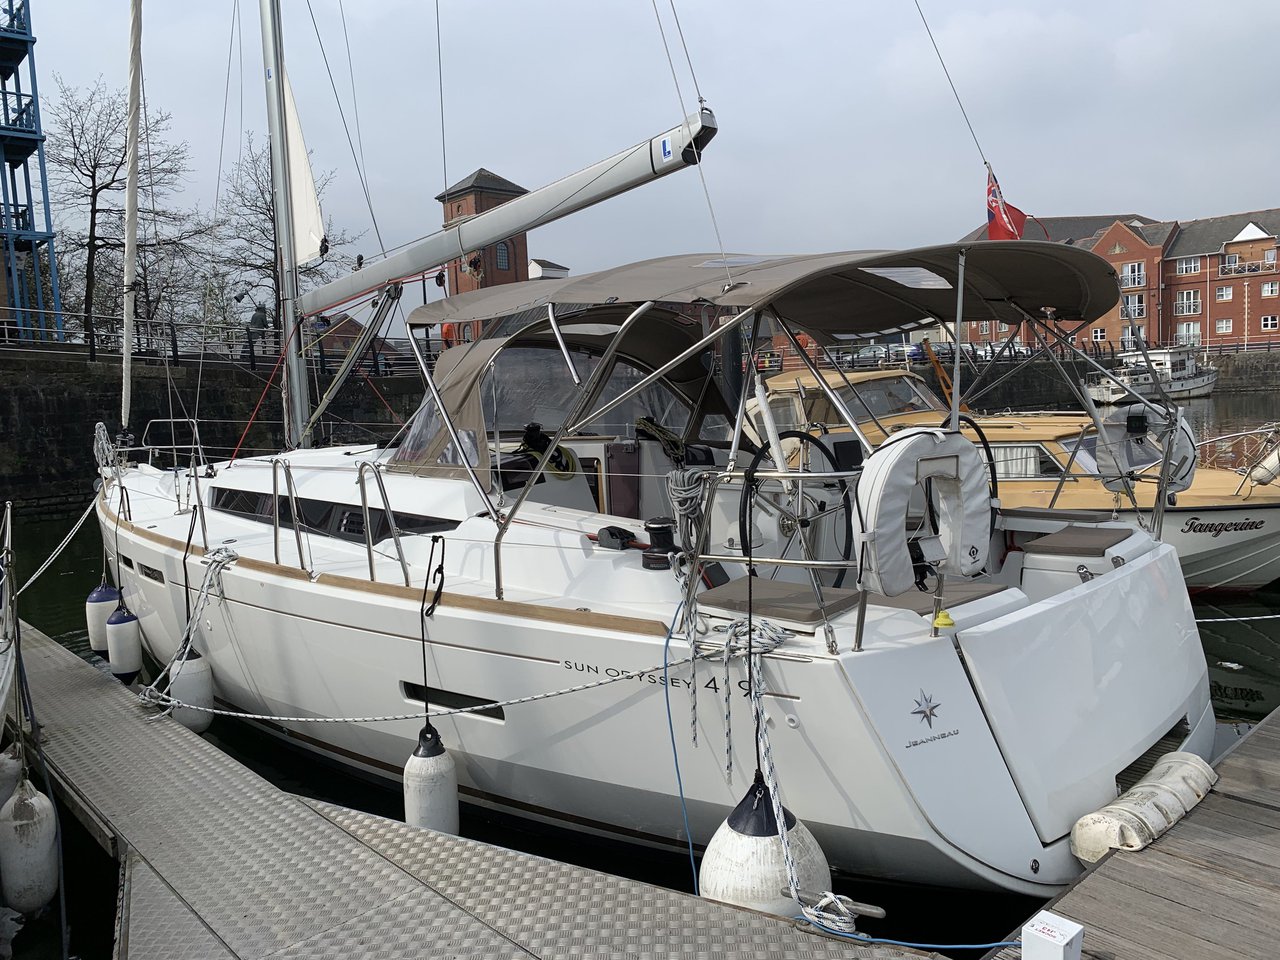 Sun Odyssey 419 - Yacht Charter Largs & Boat hire in United Kingdom Scotland Firth of Clyde Largs Largs Yacht Haven 1